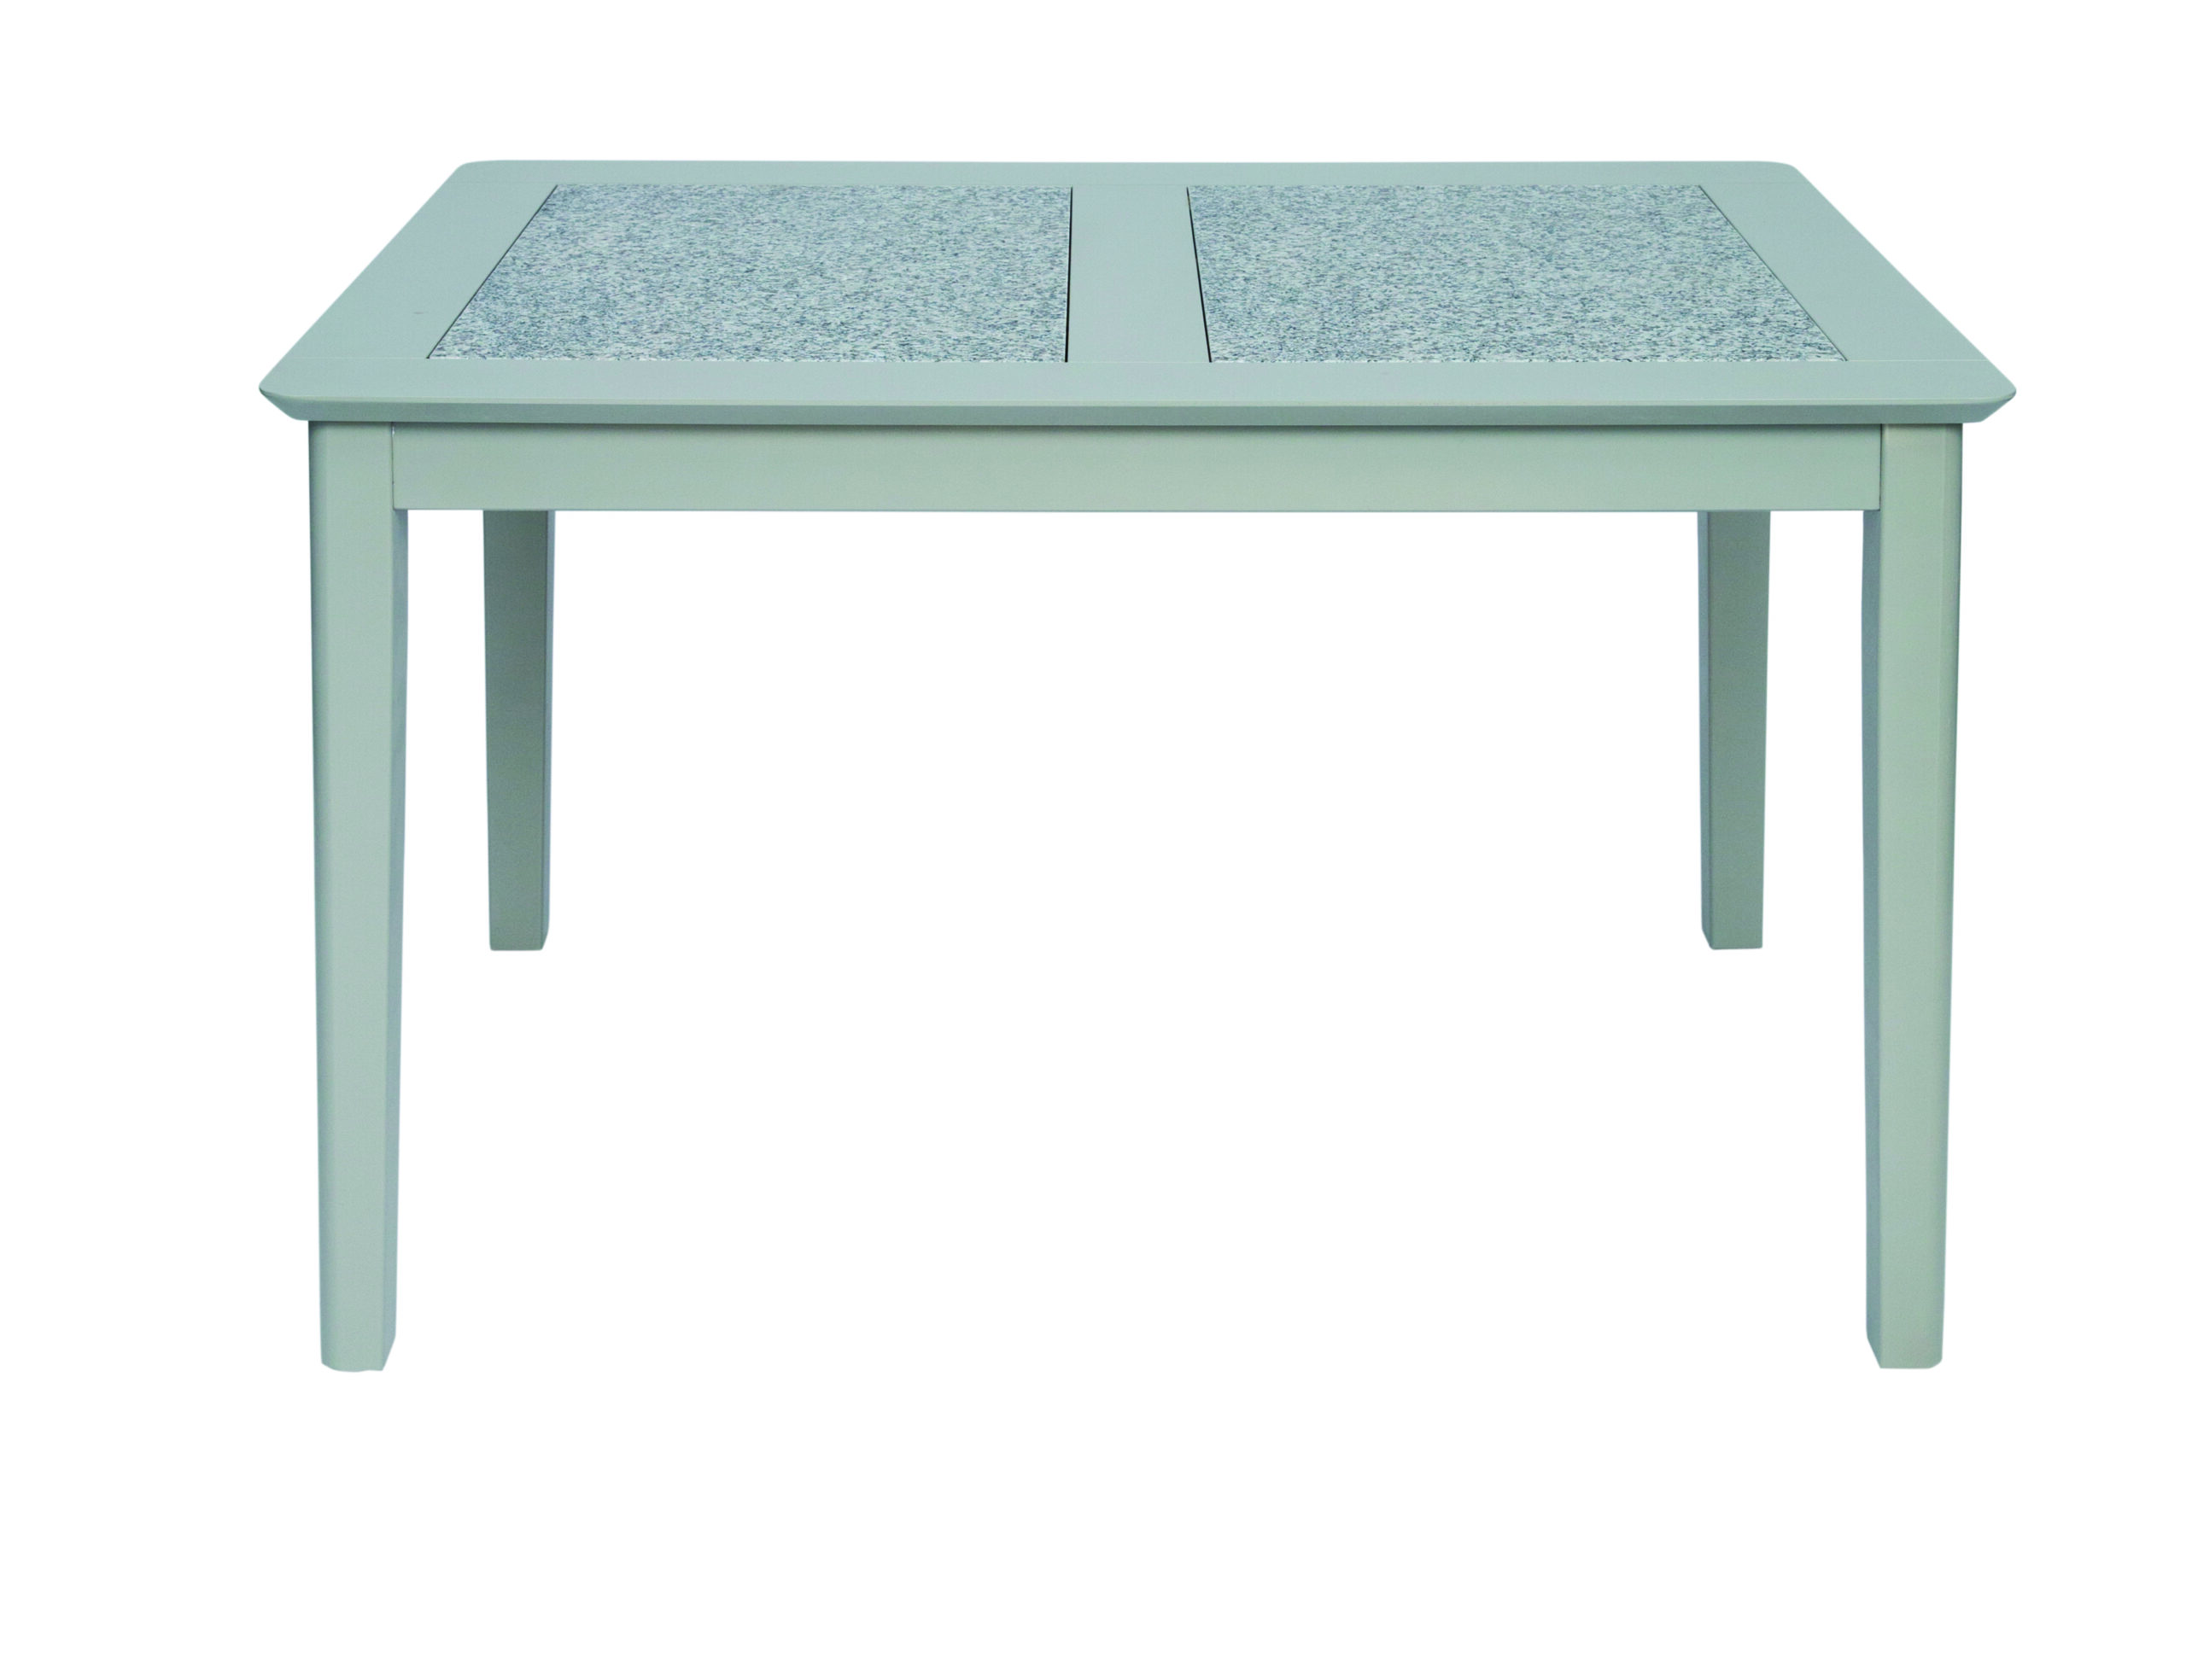 Pat small dining table